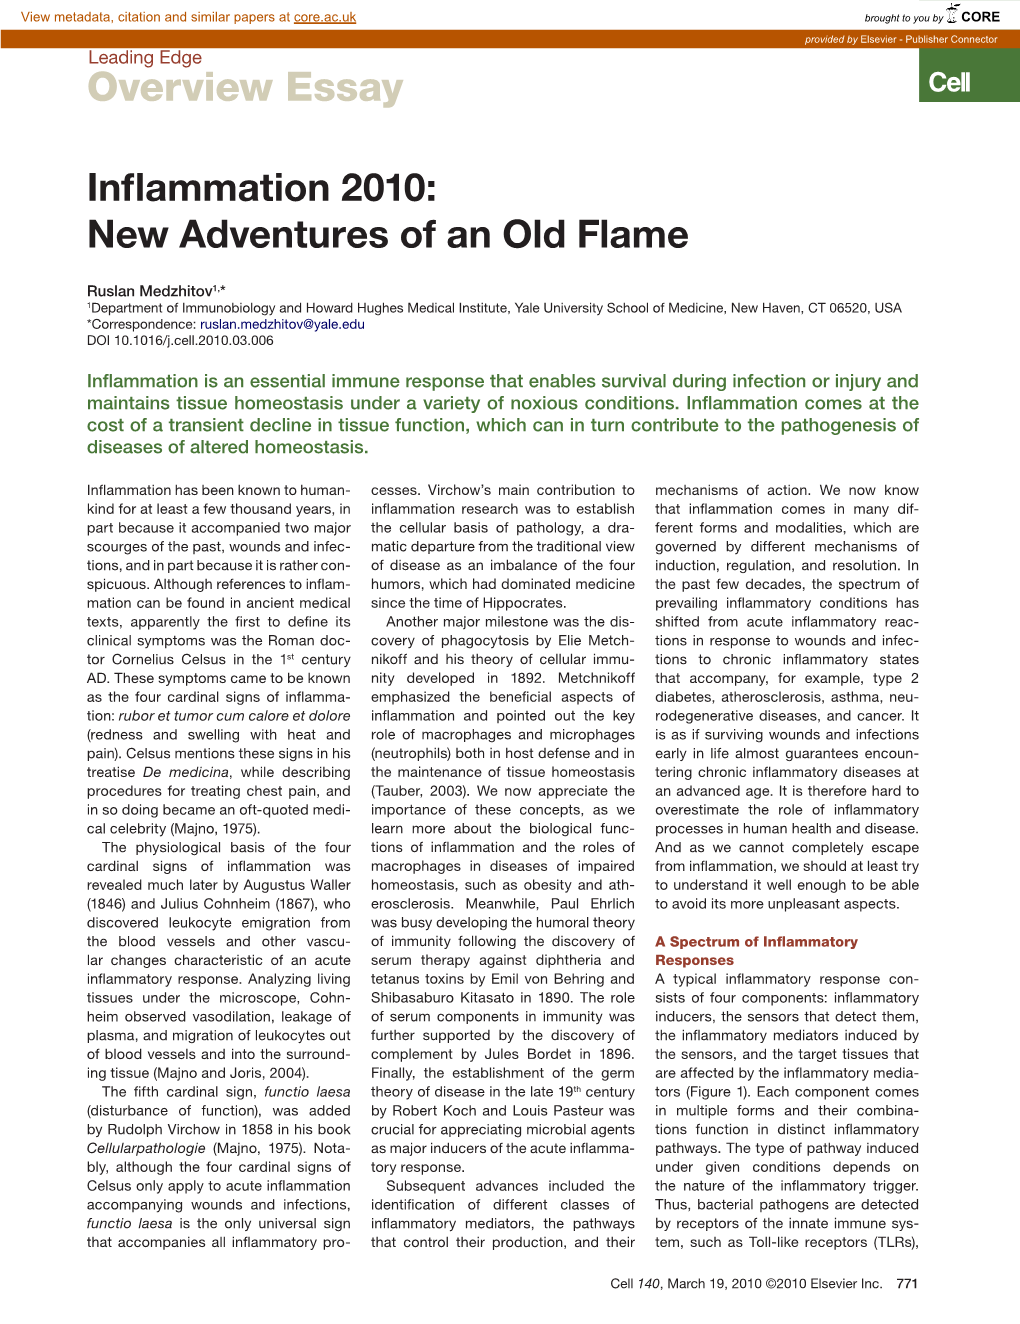 Inflammation 2010: New Adventures of an Old Flame